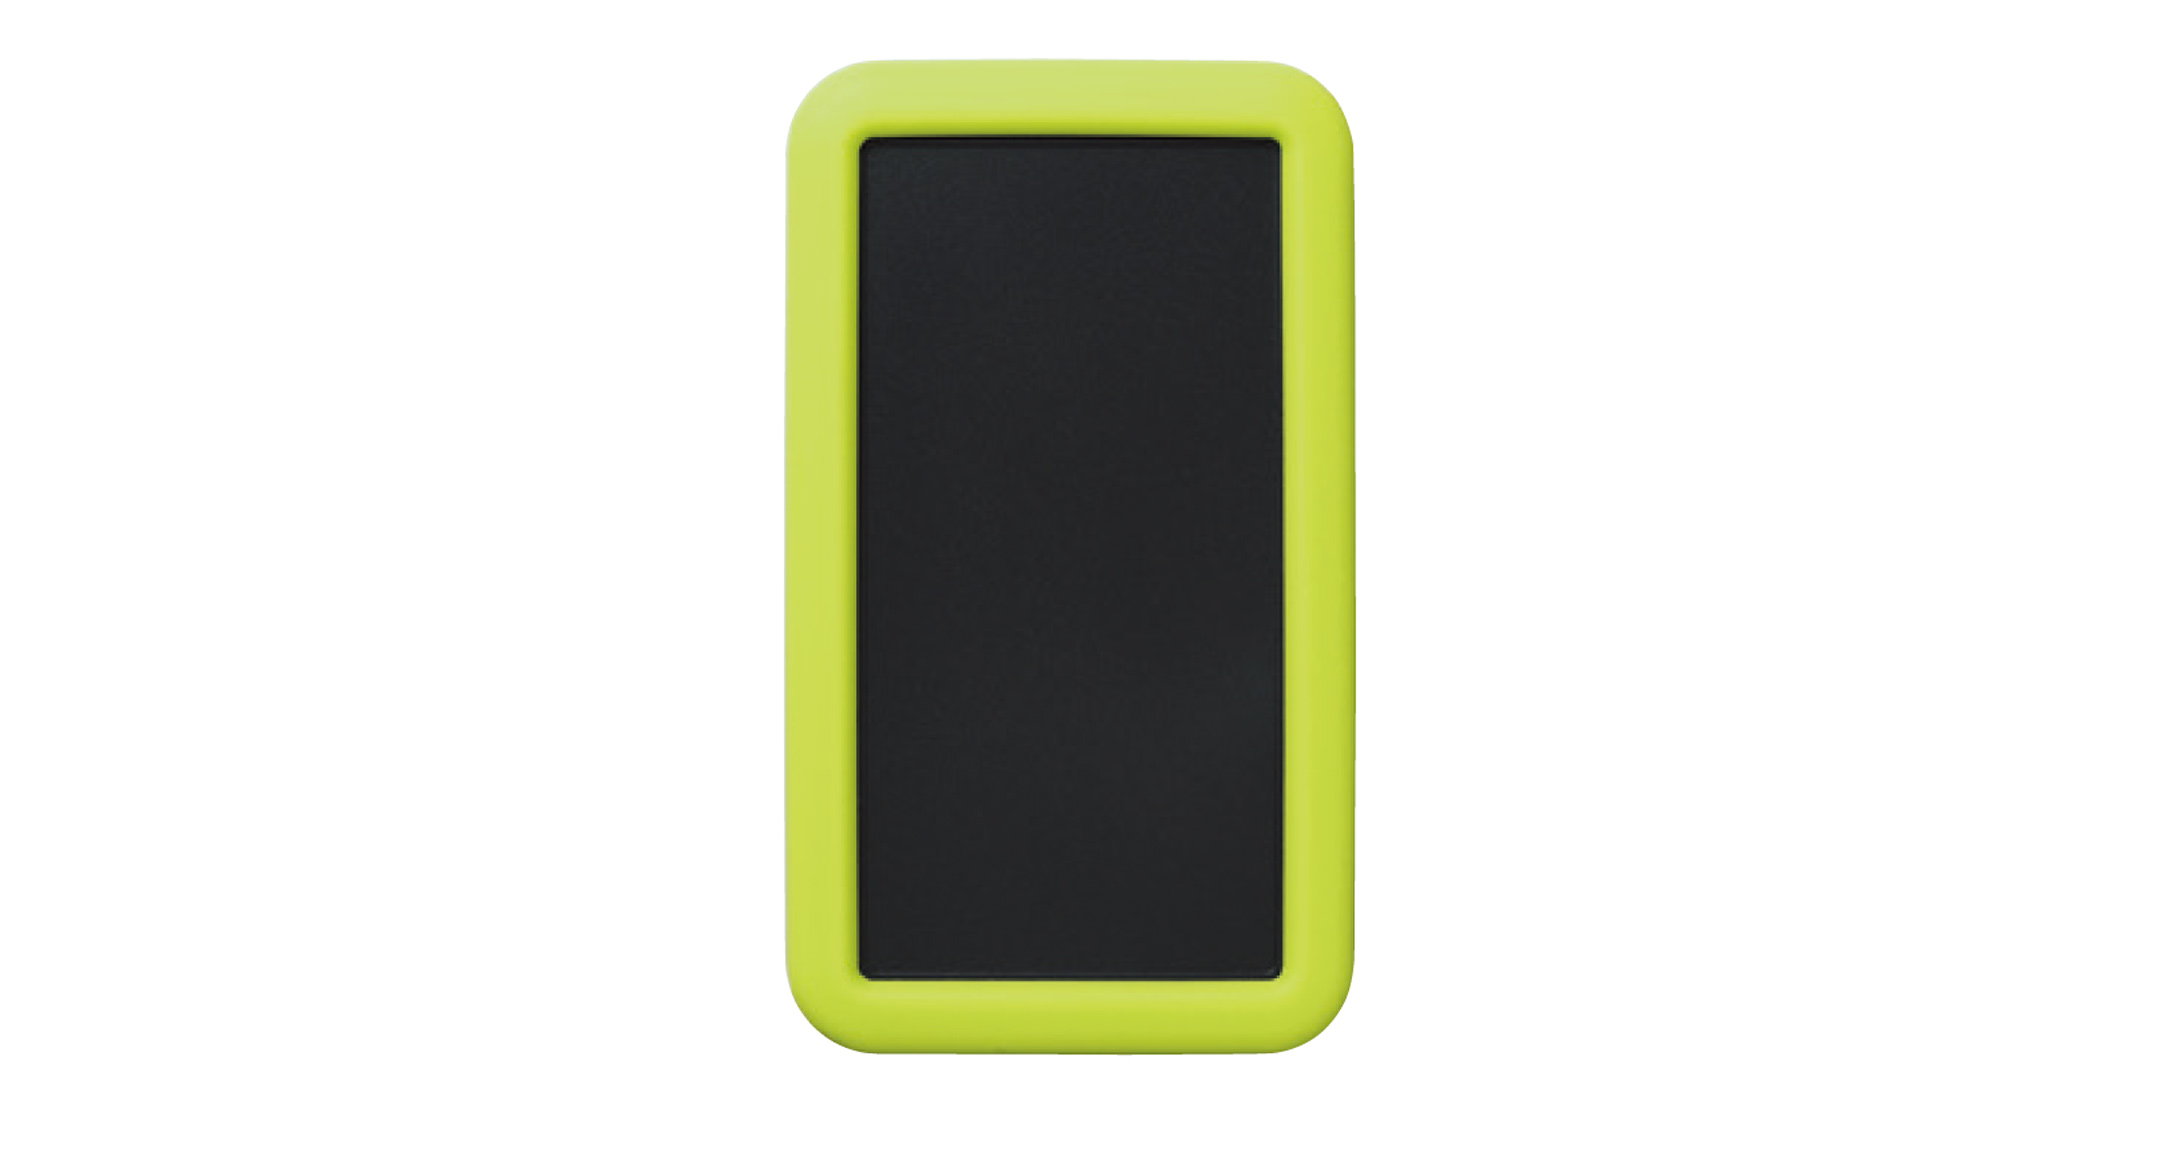 HANDHELD CASE with SILICONE COVER - LCS series:Dark gray/Green